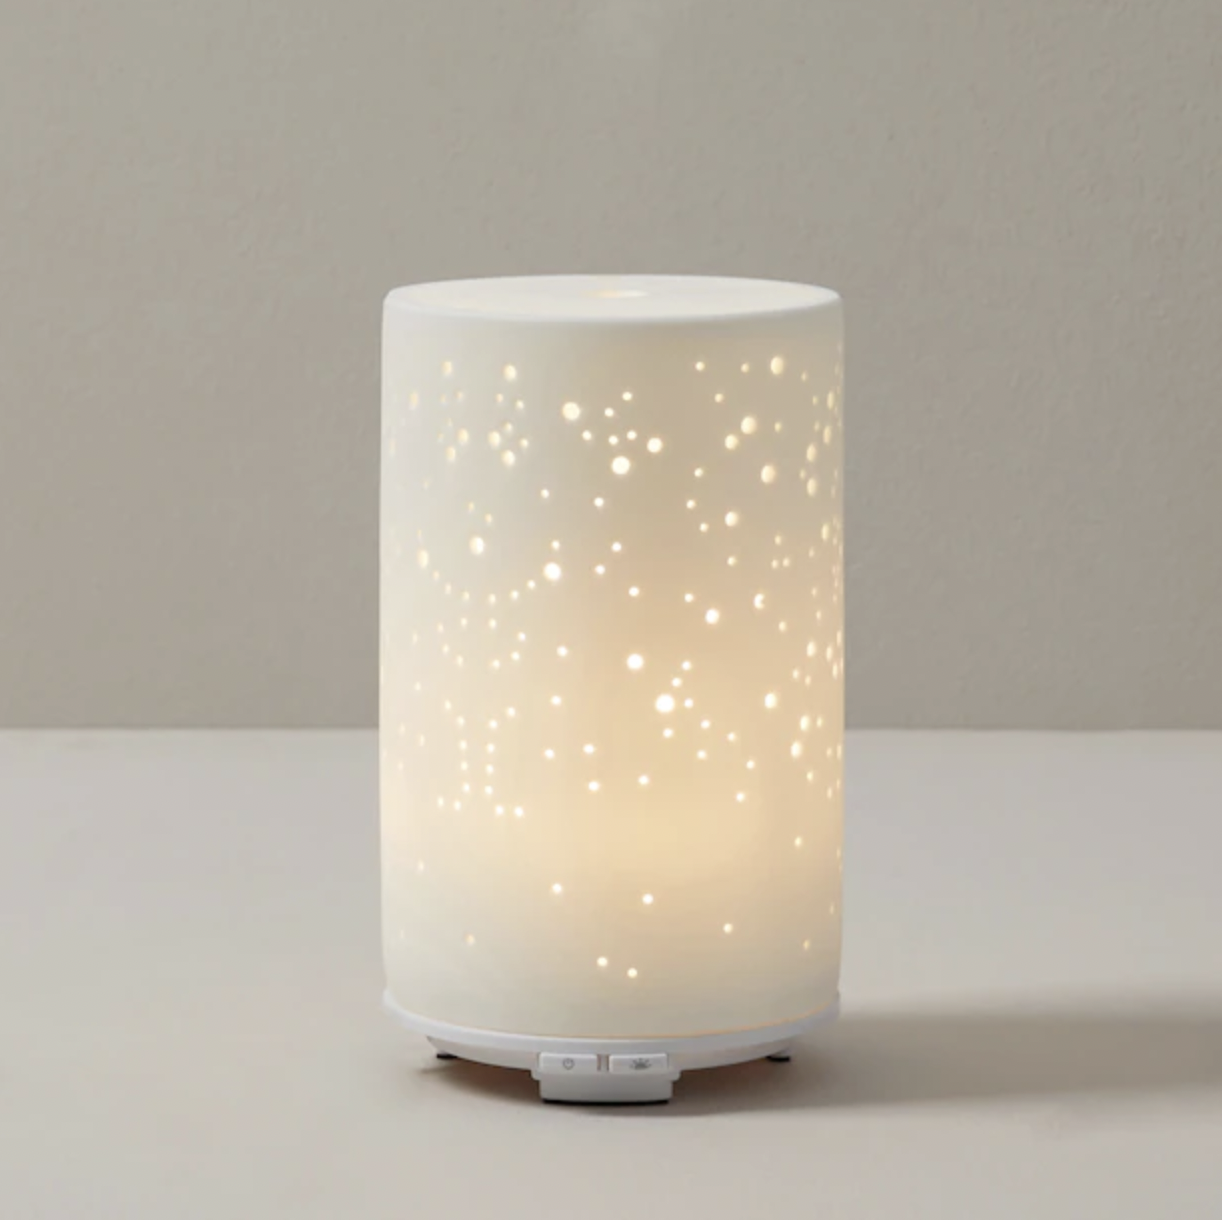 an oil diffuser with a patterned top that looks like a galaxy